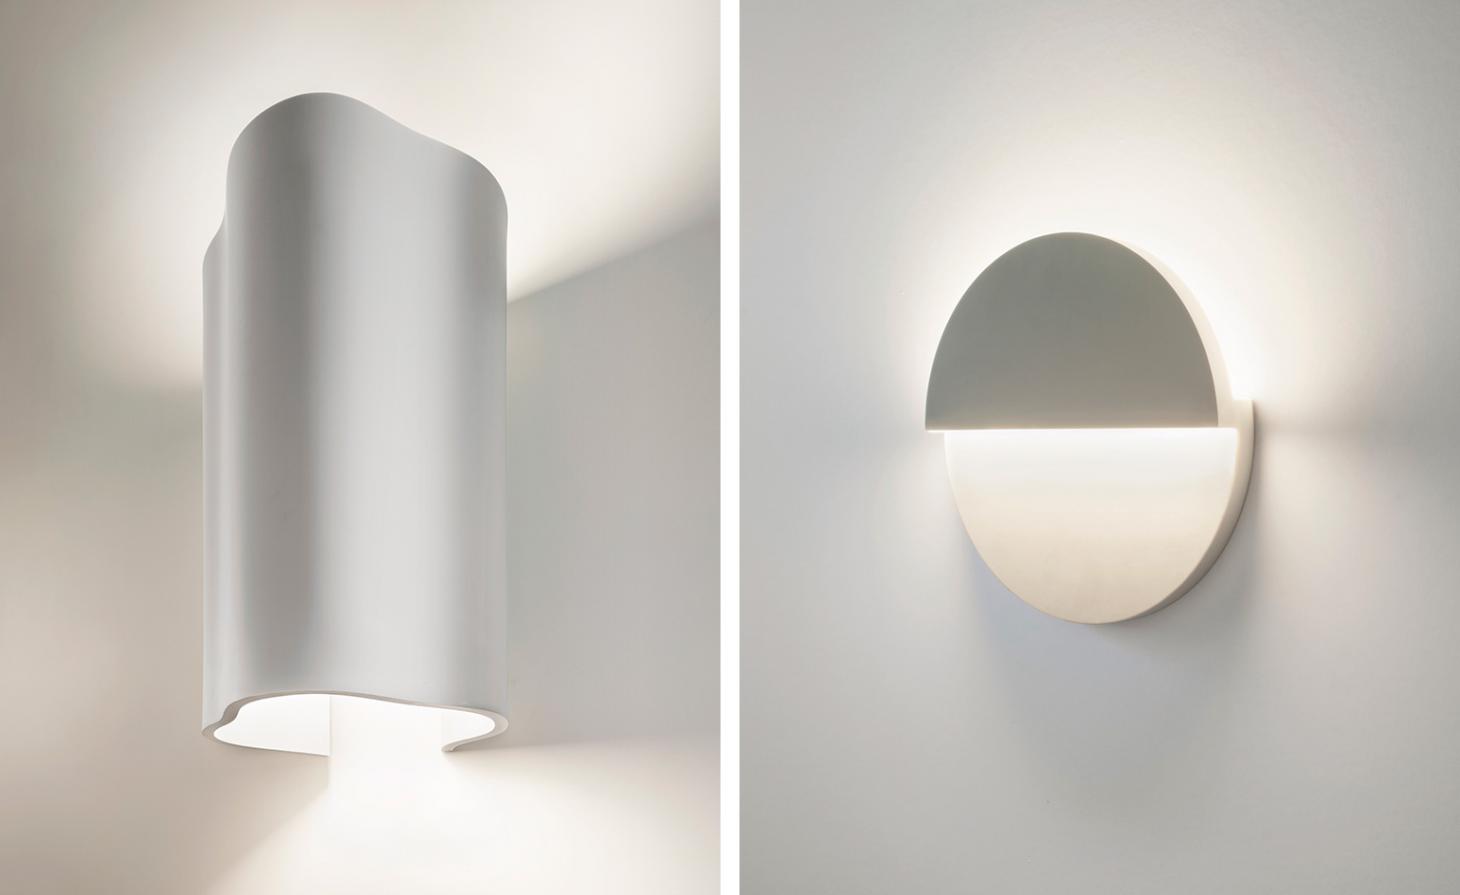 richard meier debuts new lighting collection at ralph pucci gallery new york-9